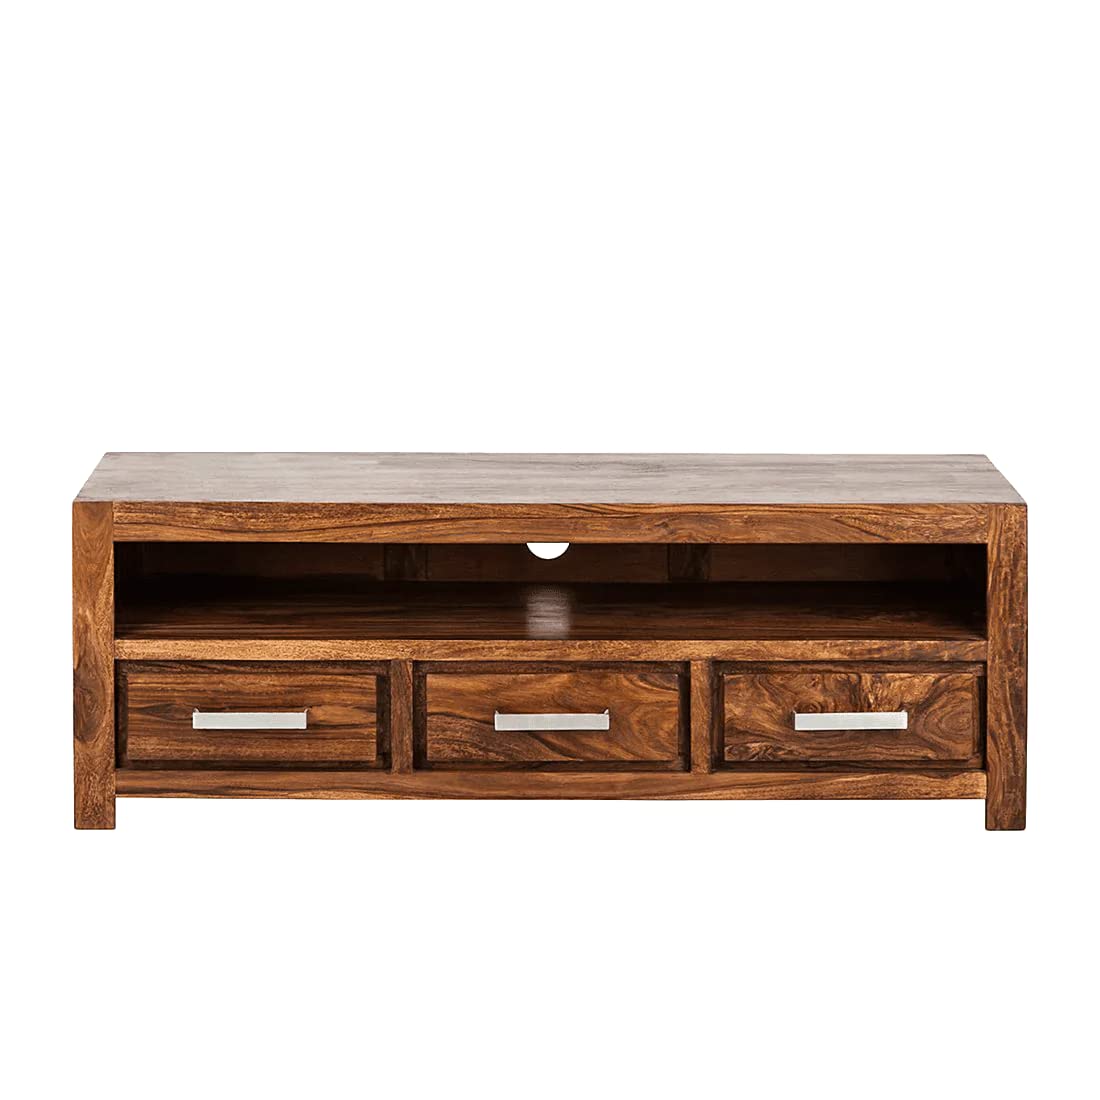 Woodmarwar Solid Sheesham Wood Entertainment Tv Unit With Storage Natural Finish For Home & Office Furniture